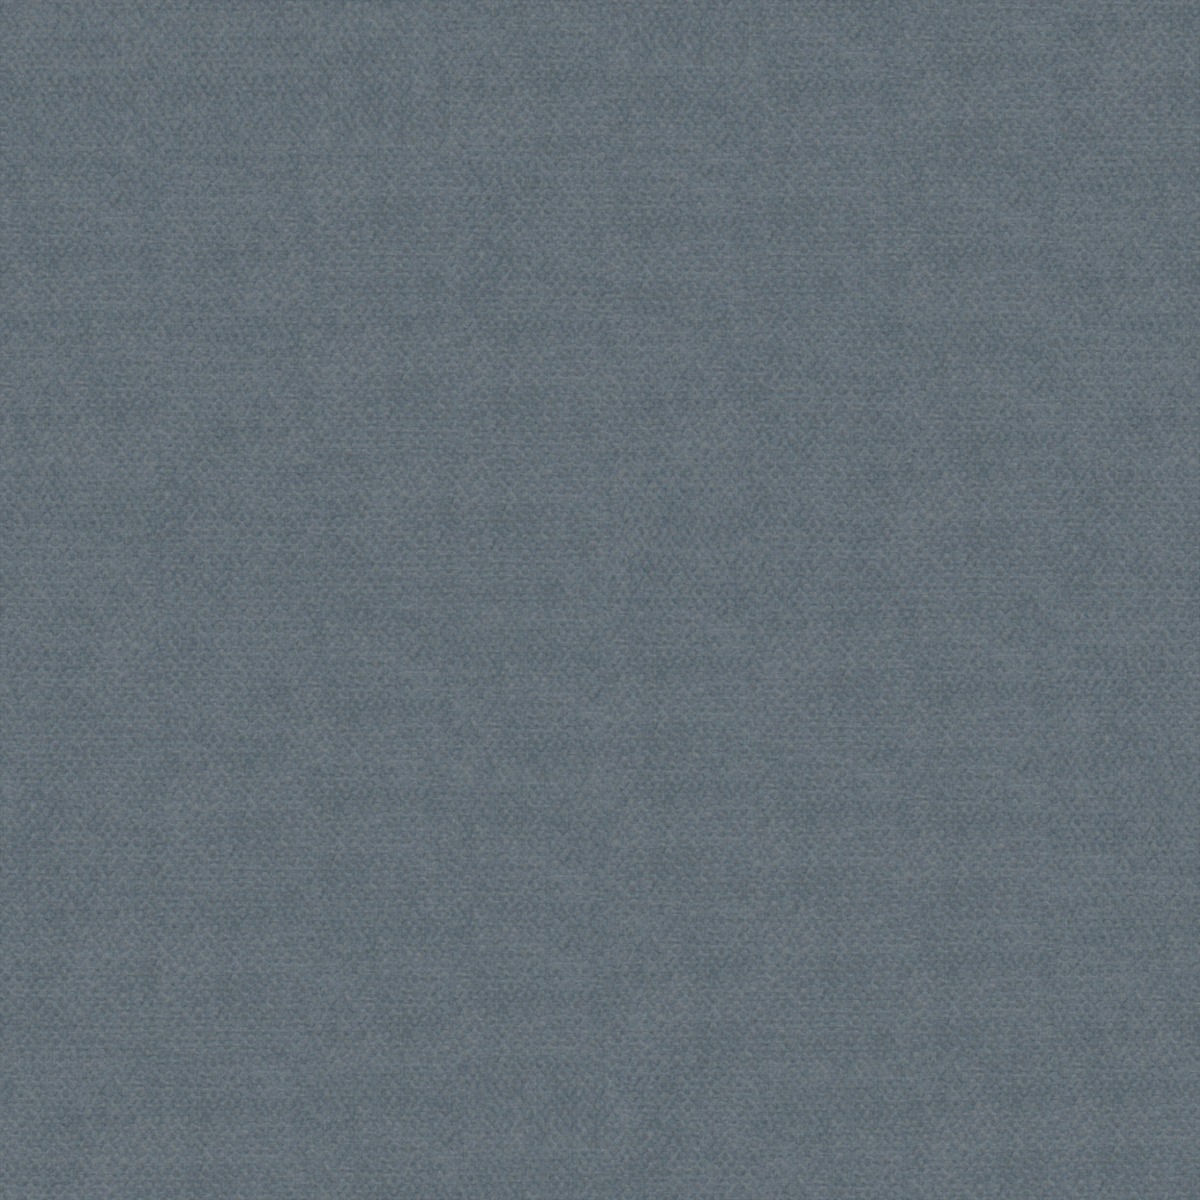 A seamless fabric texture with plain blue velvet units arranged in a None pattern